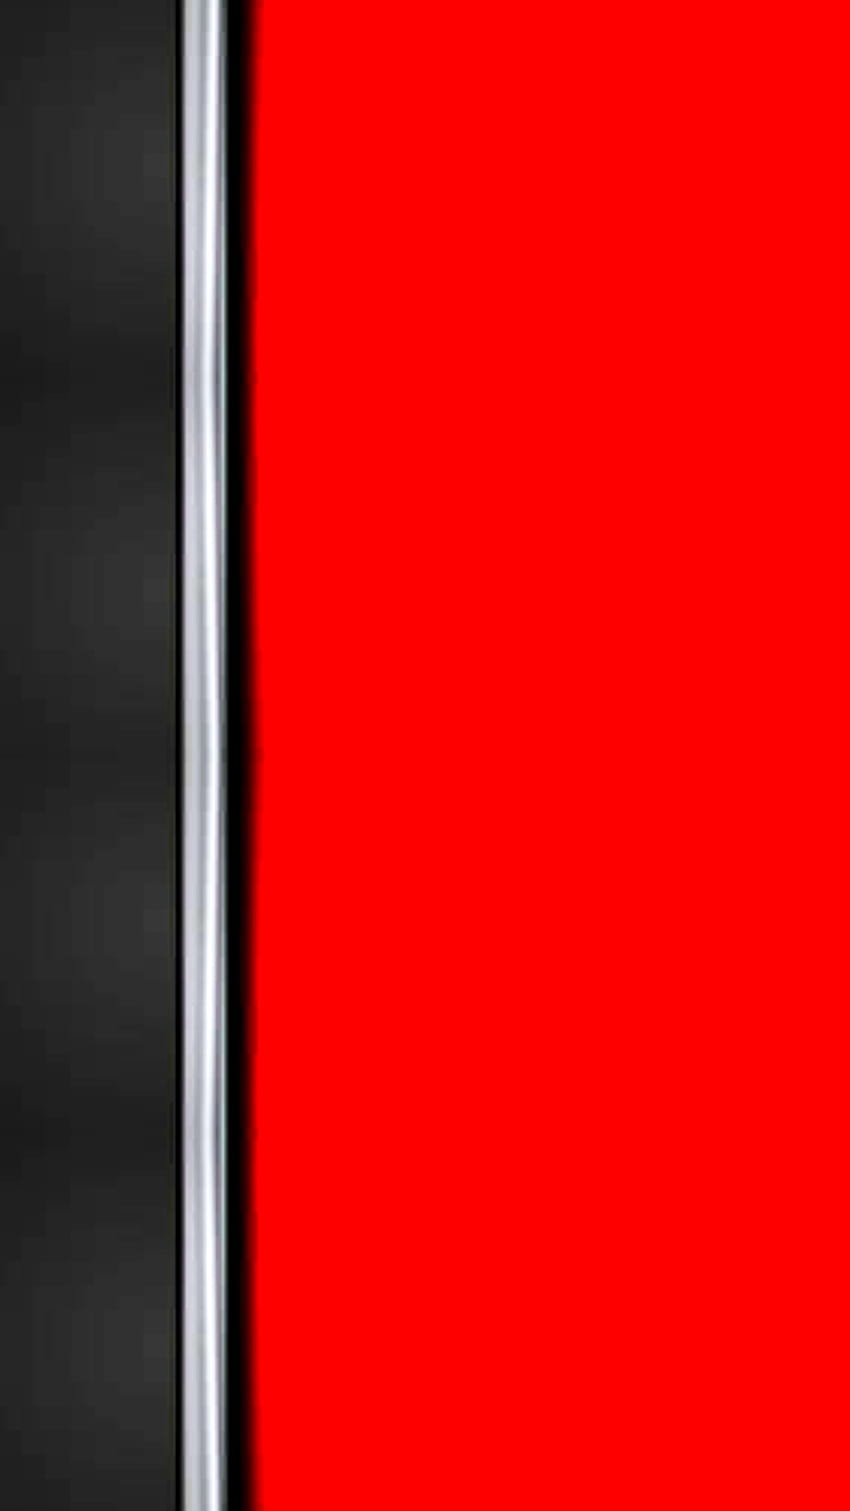 basic red black silver, digital, samsung, modern, background, tints_and_shades, pattern, simple, abstract, galaxy, iphone HD phone wallpaper